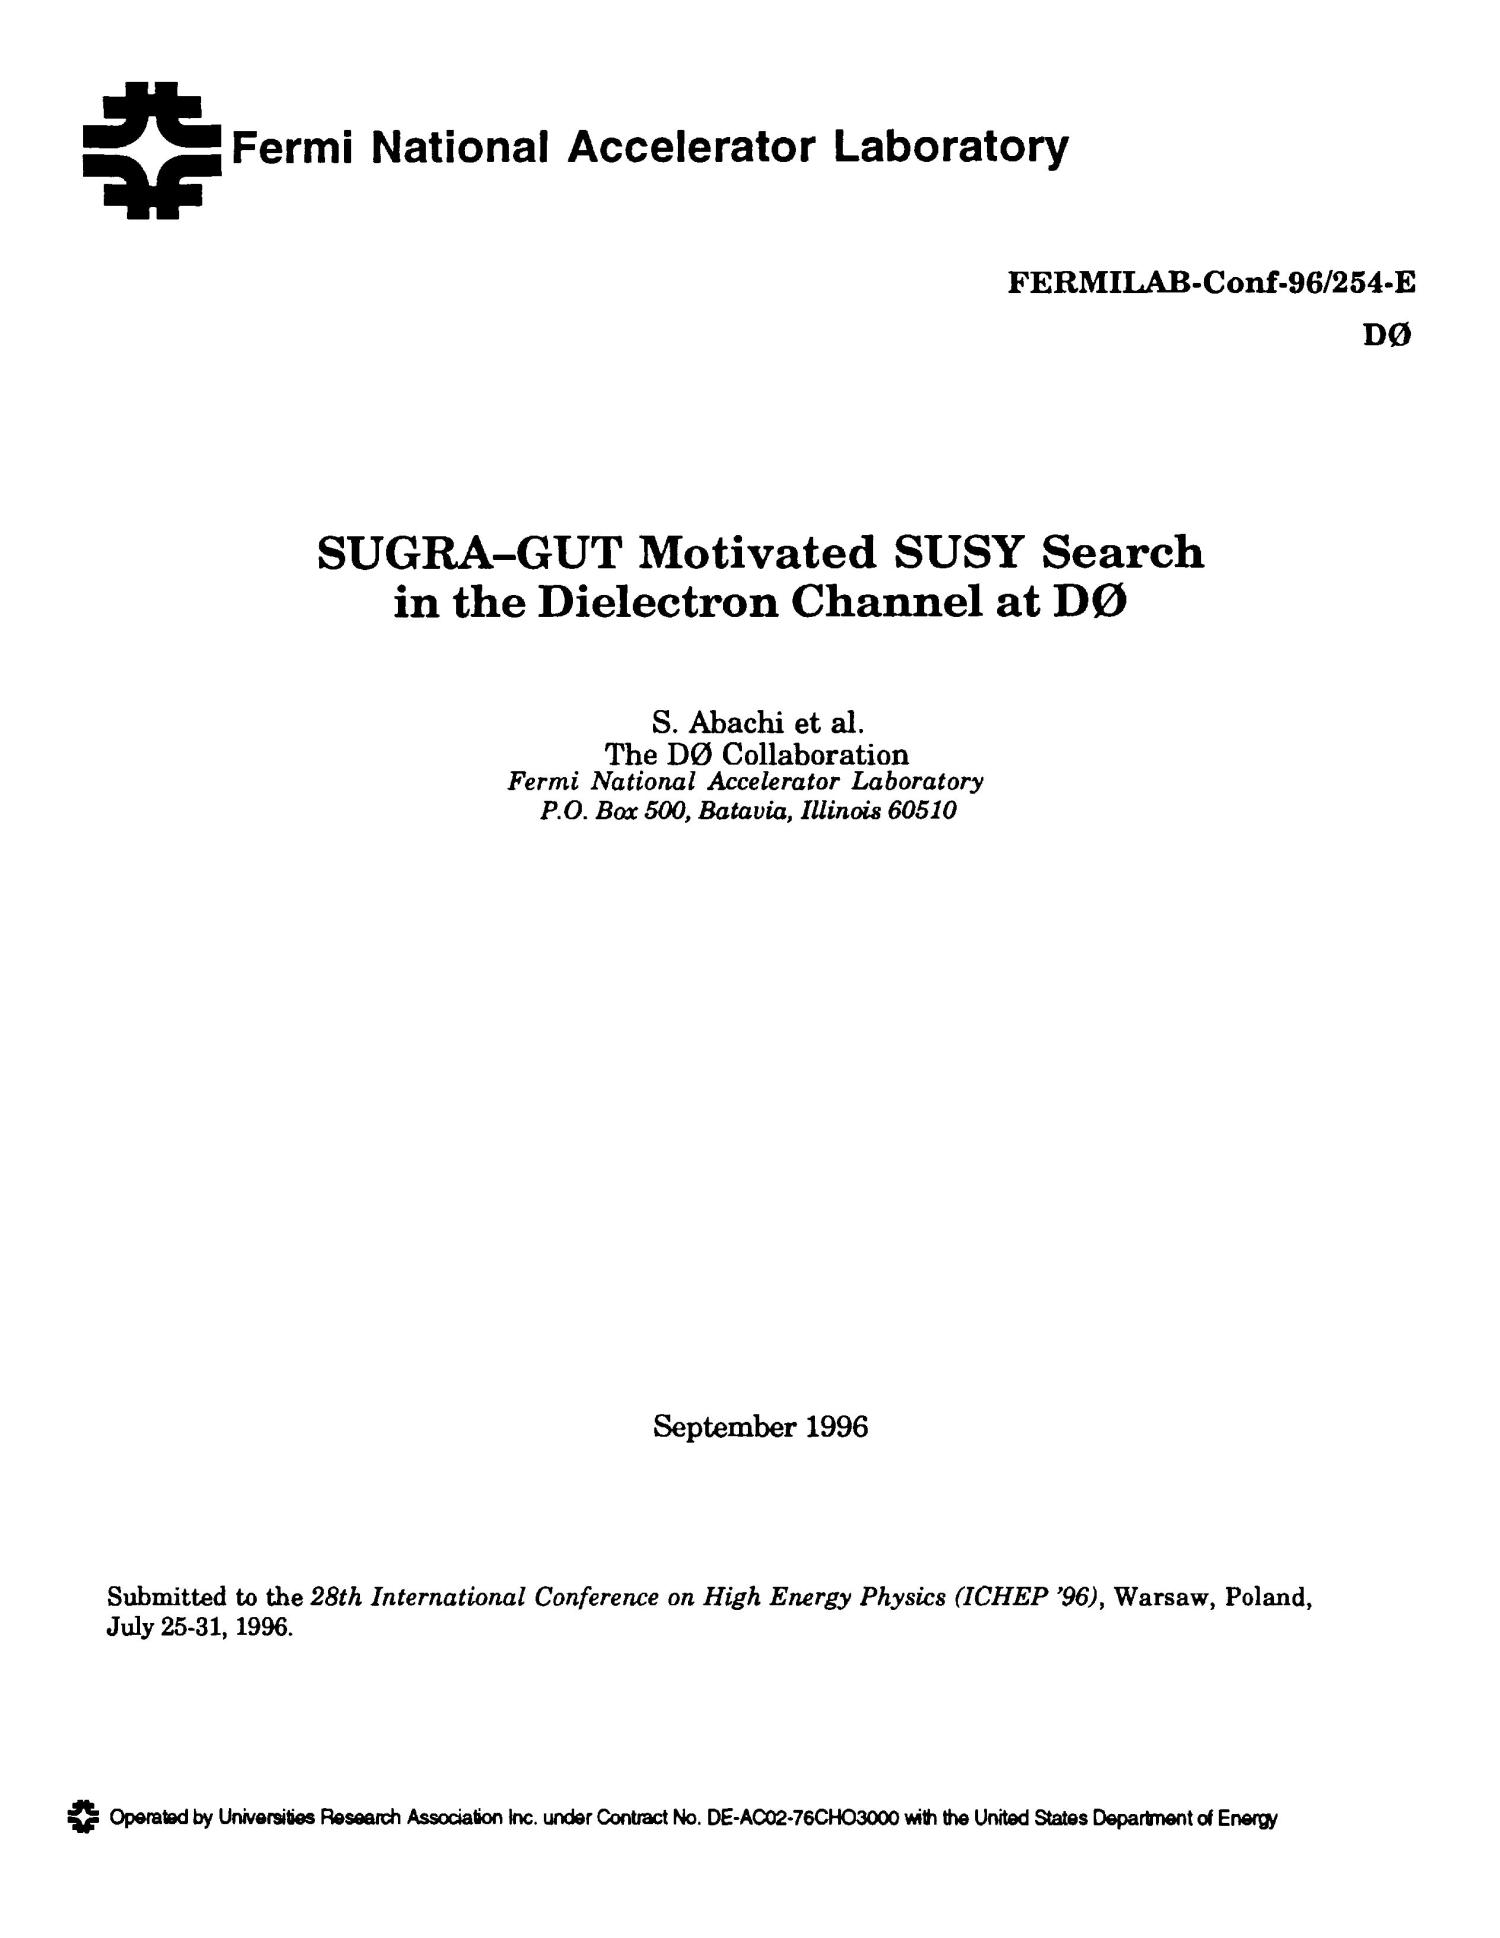 SUGRA-GUT motivated SUSY search in the dielectron channel at D0
                                                
                                                    [Sequence #]: 1 of 10
                                                